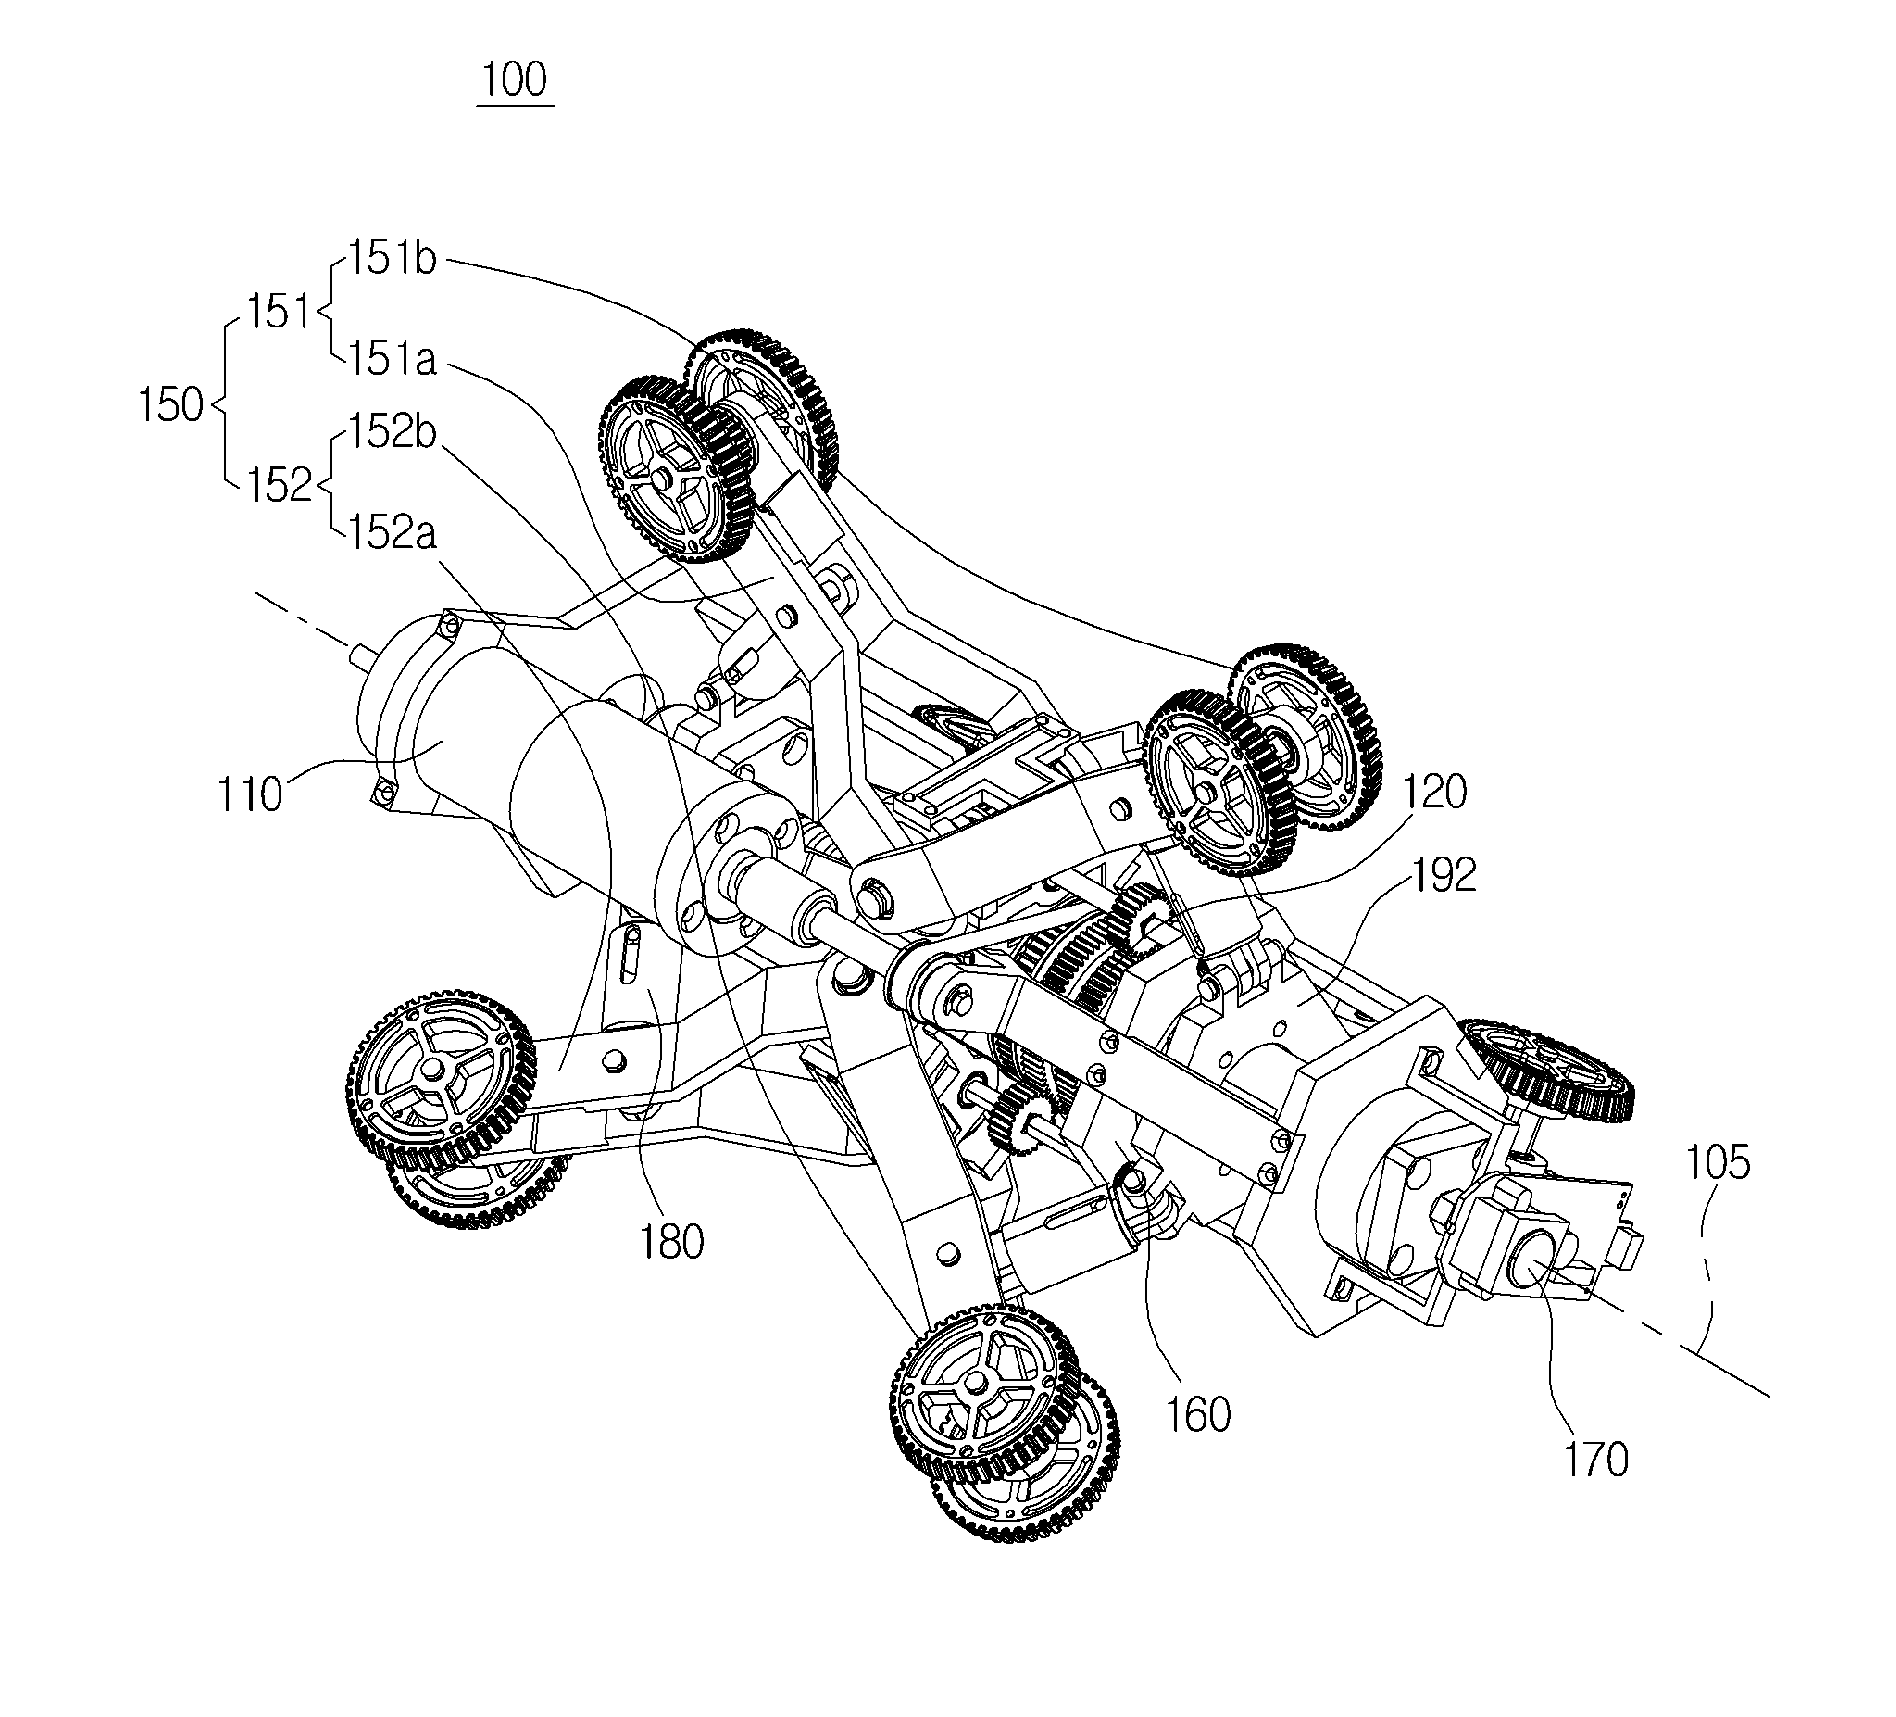 Robot using multi-output differential gear